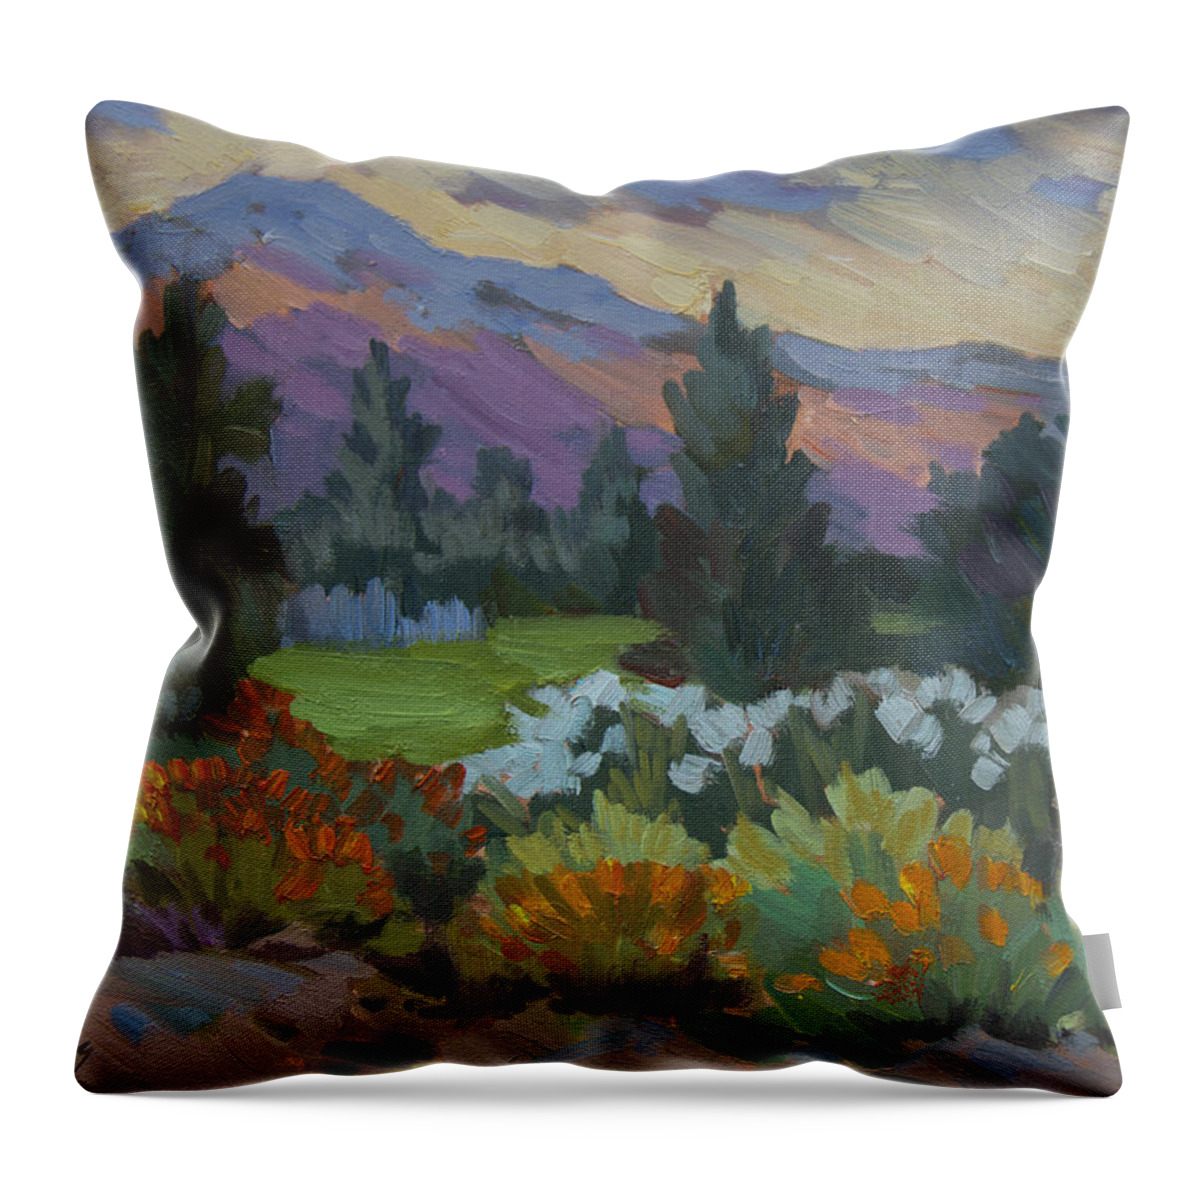 Overcast Light Throw Pillow featuring the painting Overcast Light in Santa Barbara by Diane McClary